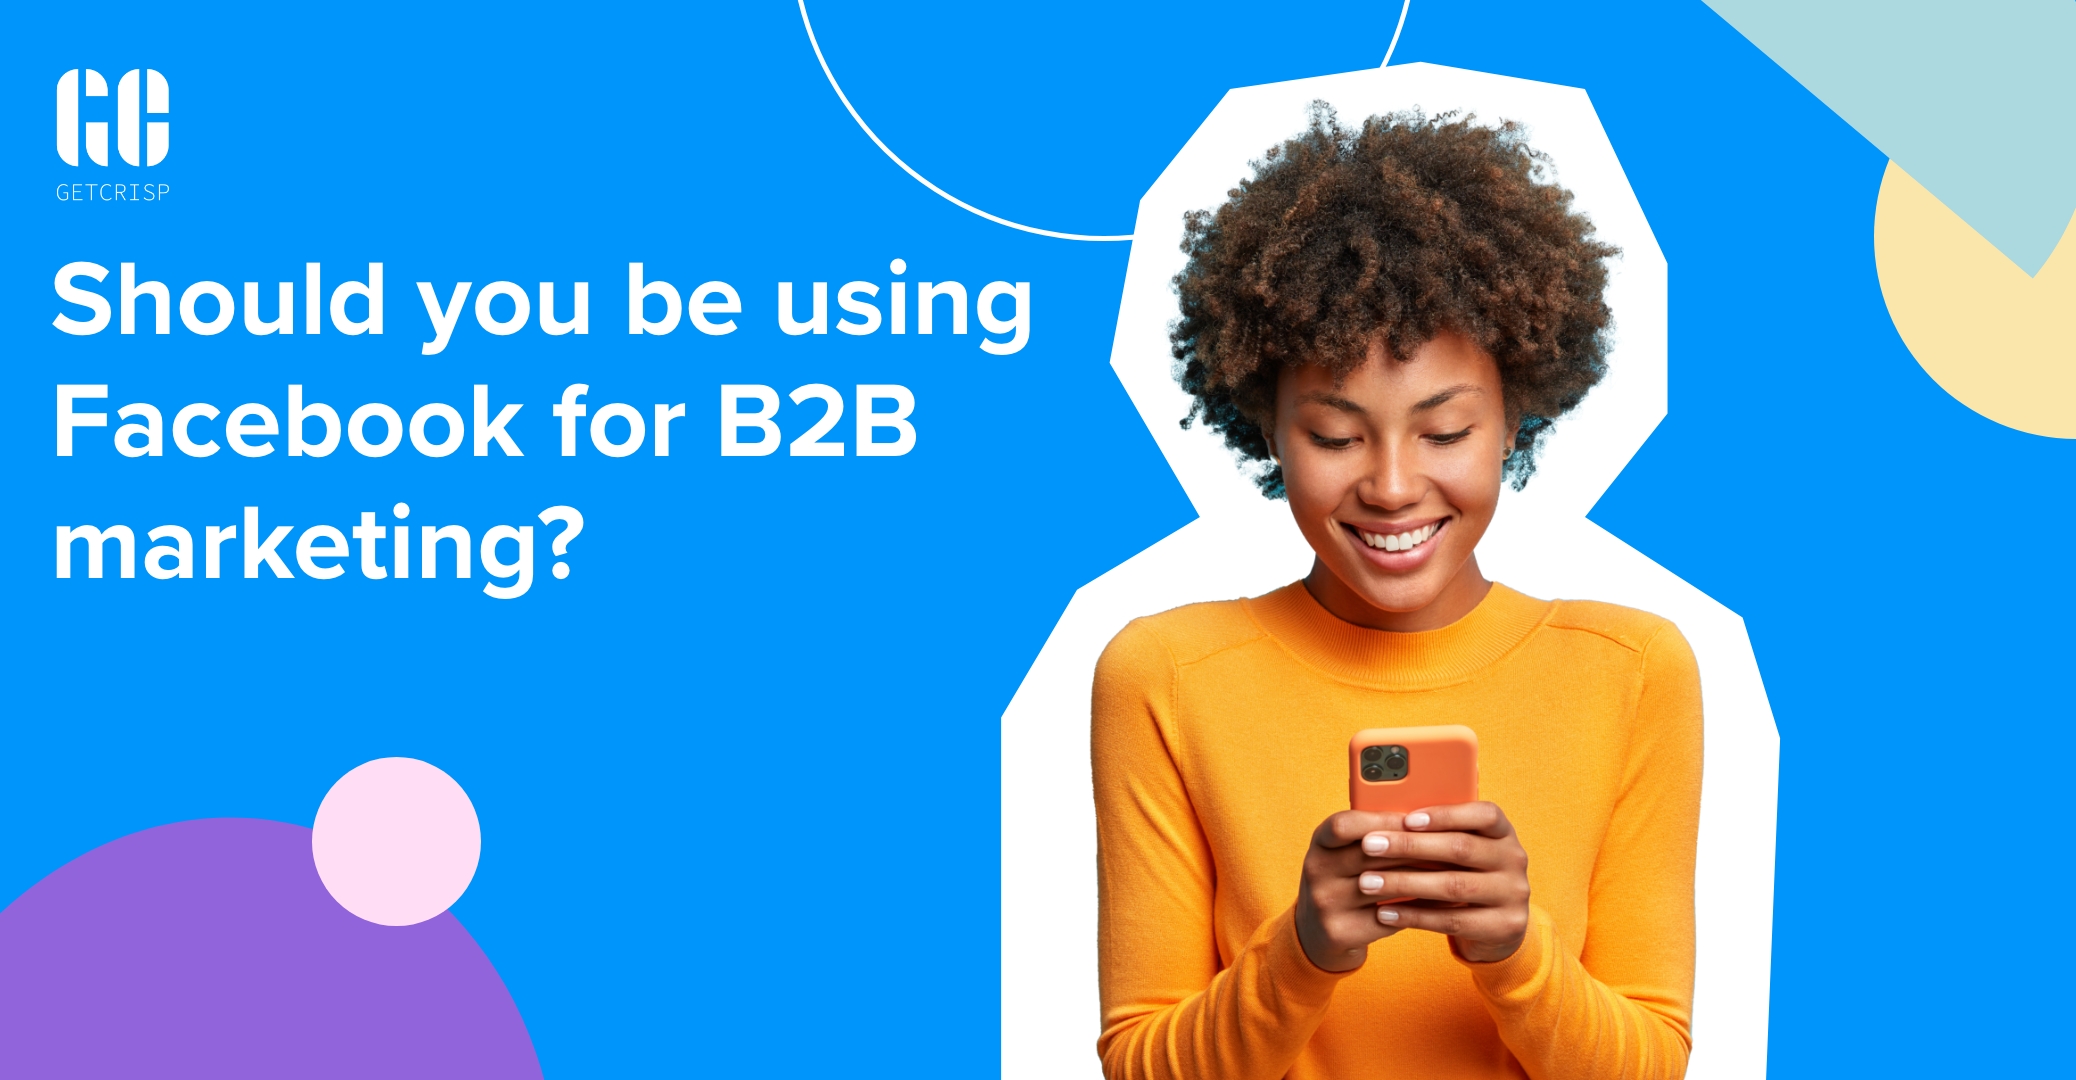 Should you be using Facebook for B2B marketing?